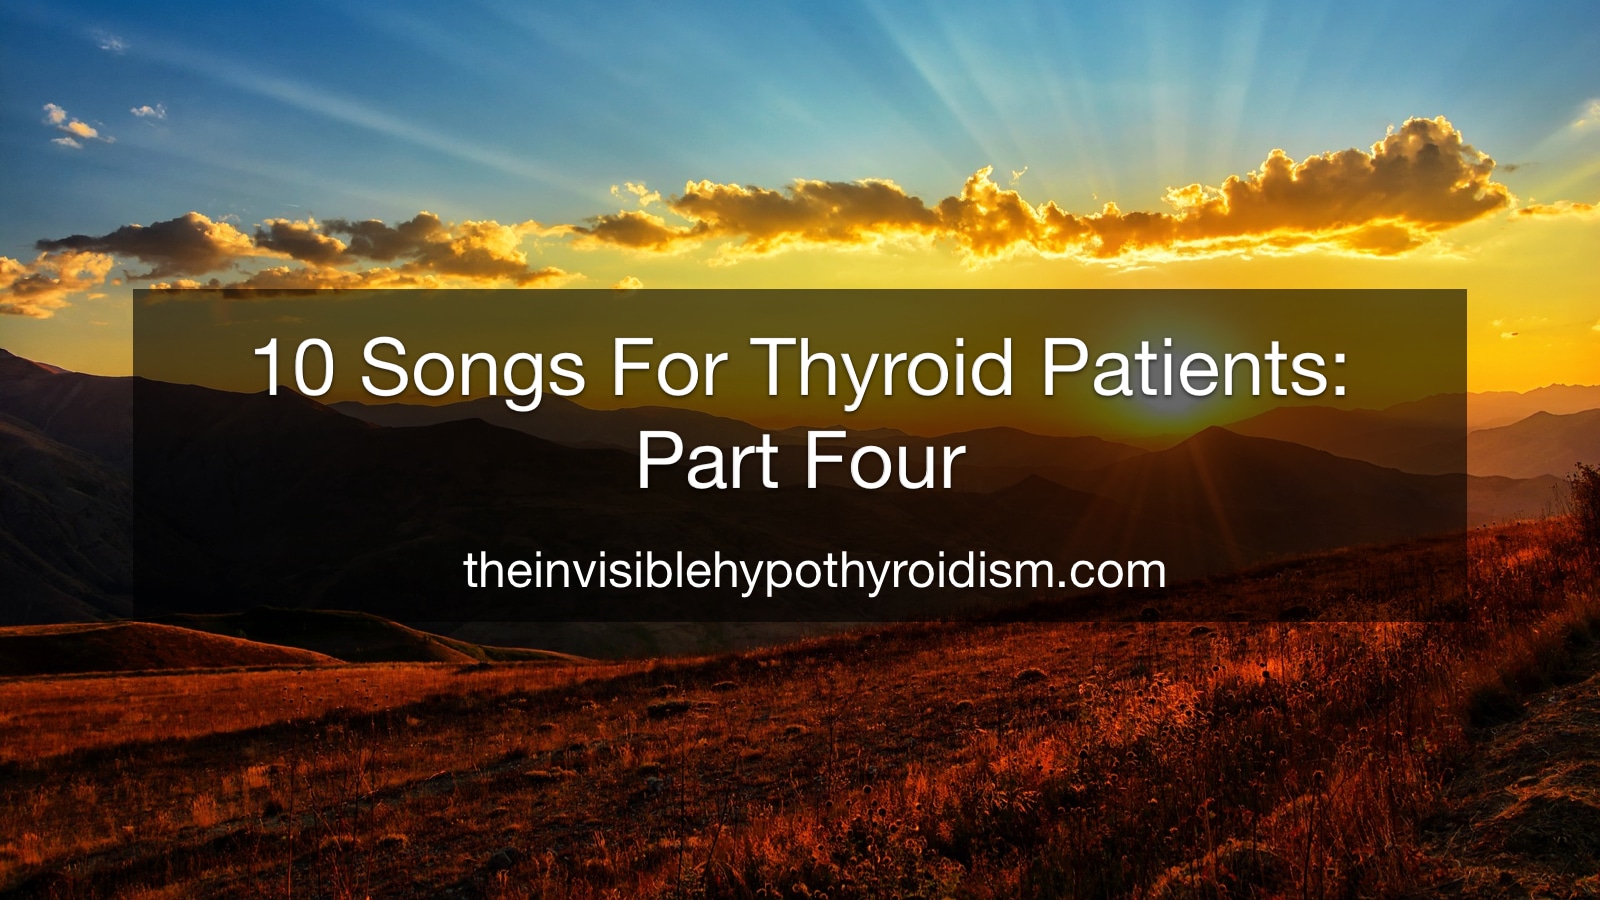 10 Songs For Thyroid Patients: Part Four